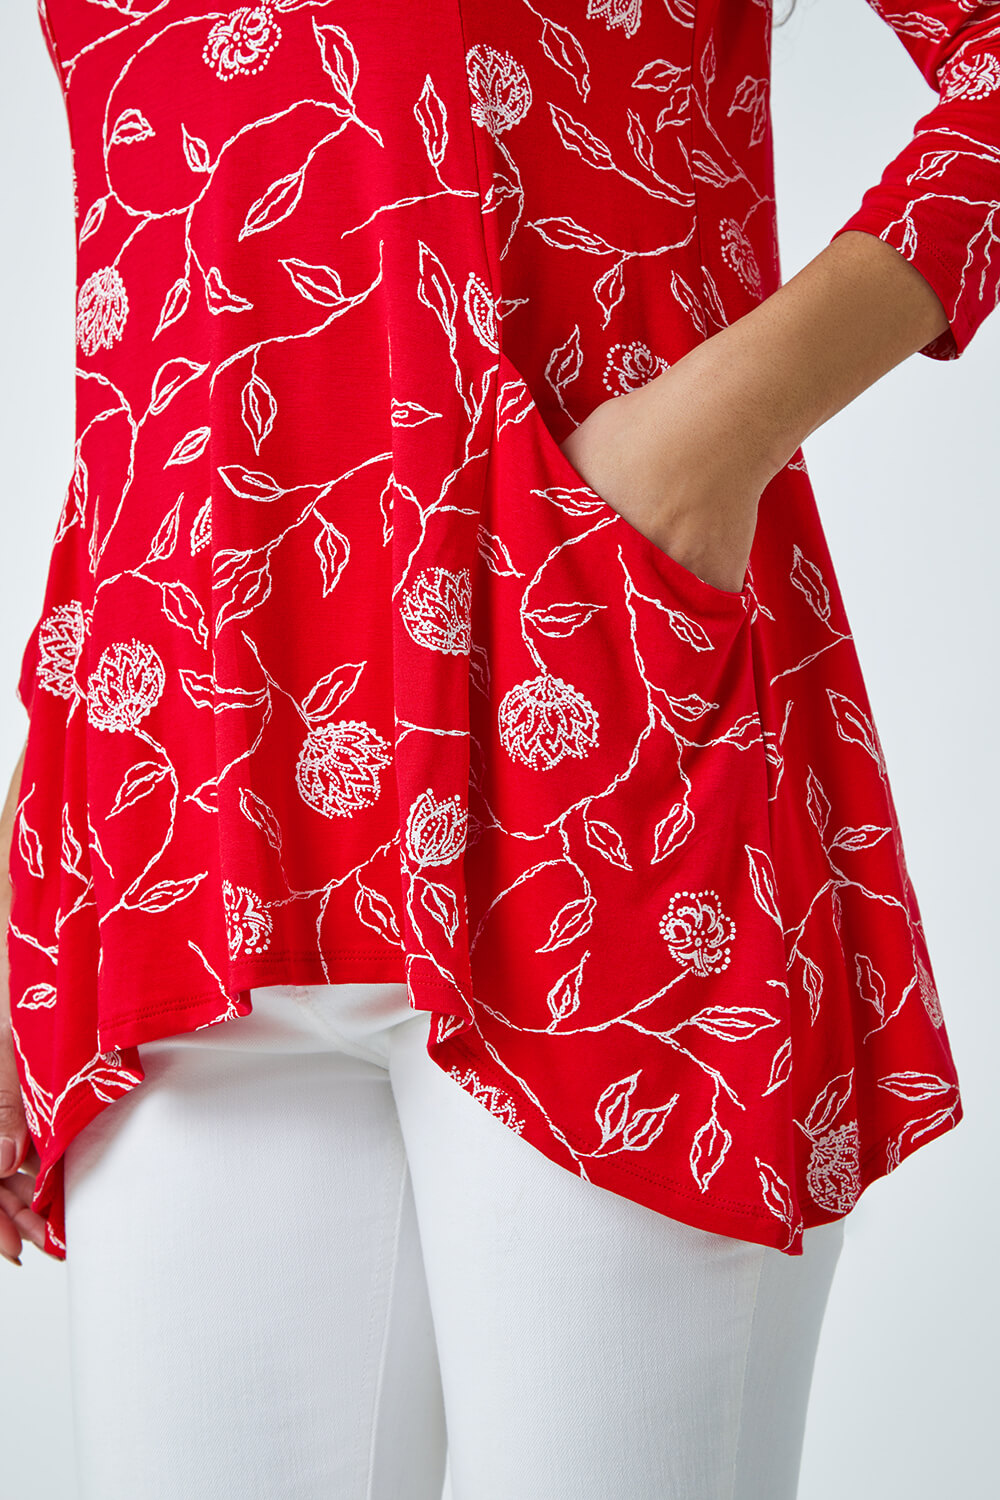 Red Floral Print Swing Stretch Top, Image 5 of 5